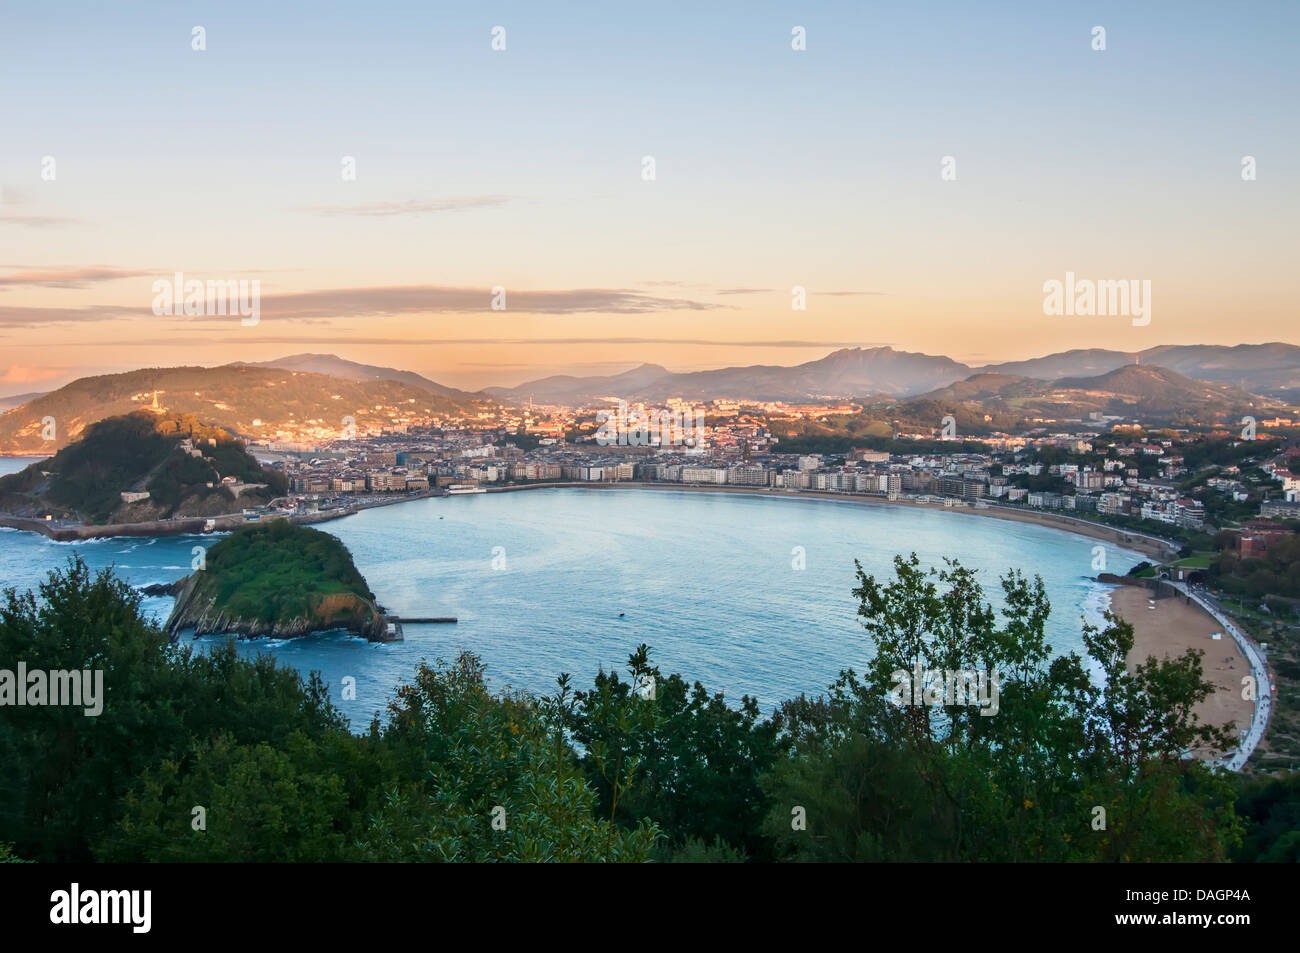 Overview of the Bay of San Sebastian, Spain Stock Photo